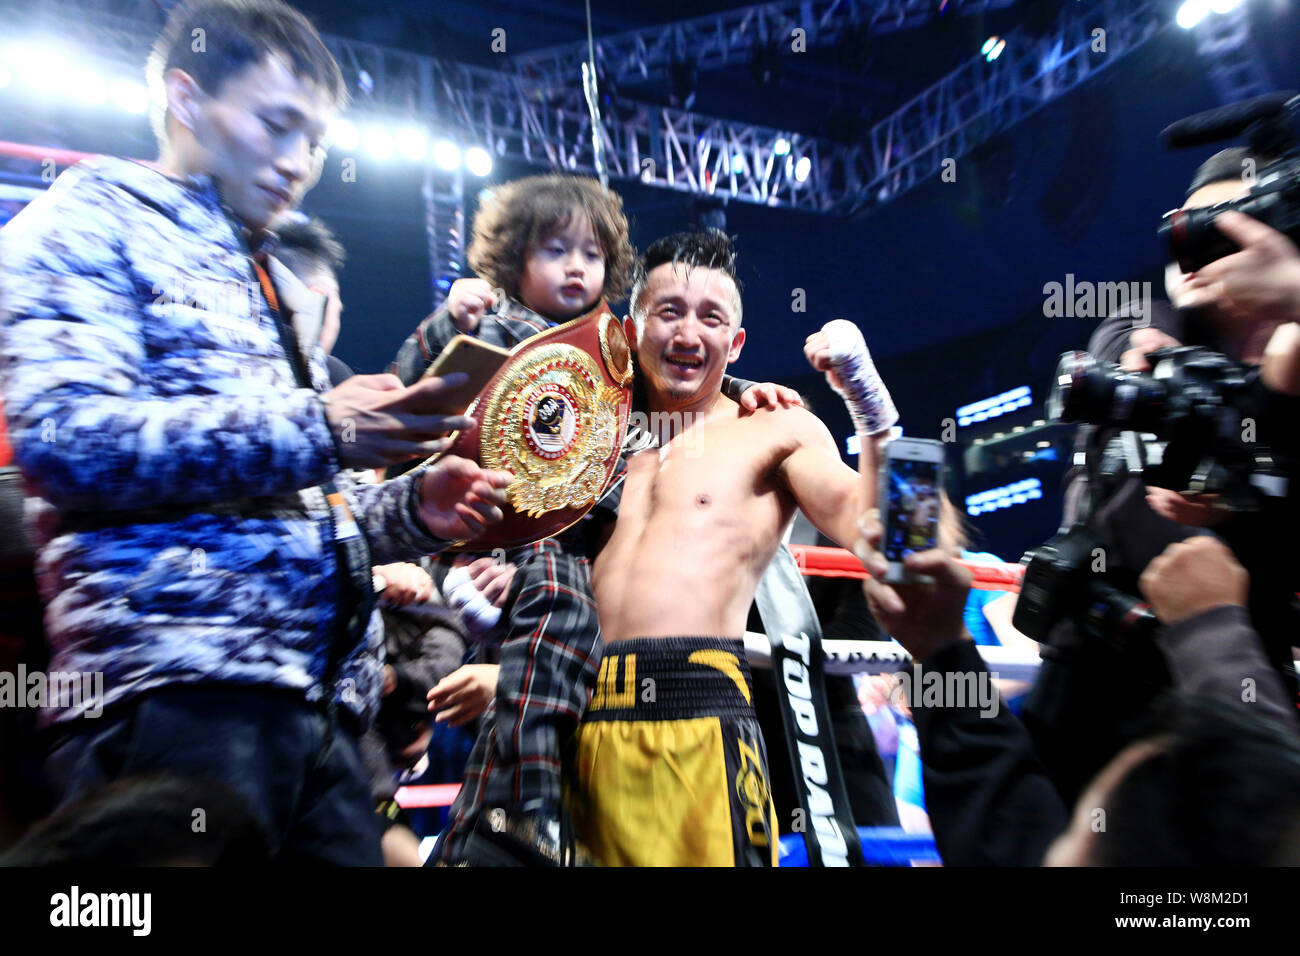 China's Zou Shiming, center, poses with his son to celebrate after defeating Brizil's Natan Santana Coutinho during their bout in Shanghai, China, 30 Stock Photo